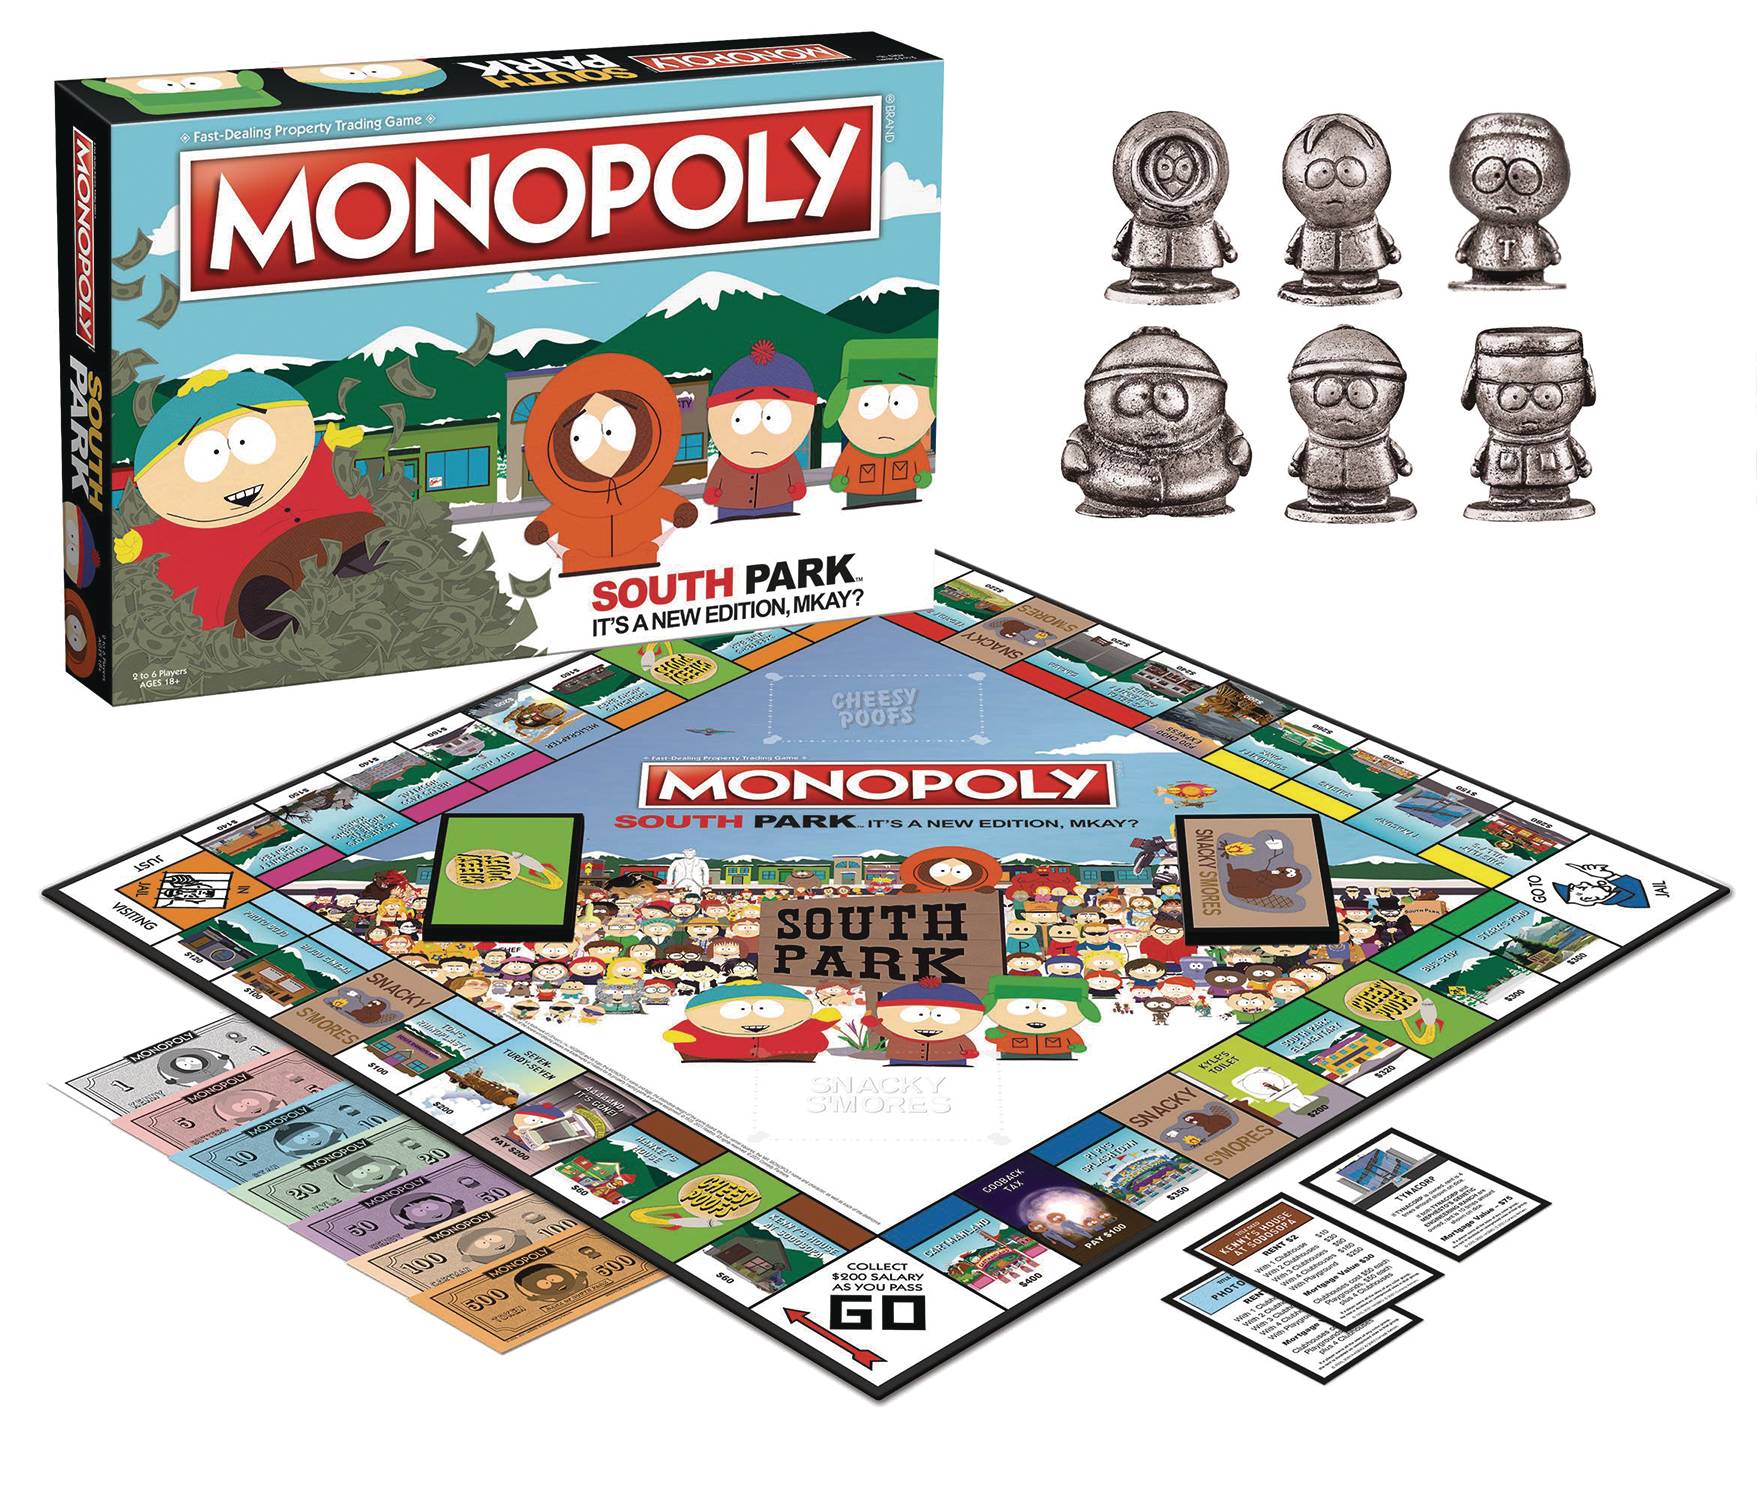 SOUTH PARK MONOPOLY BOARD GAME